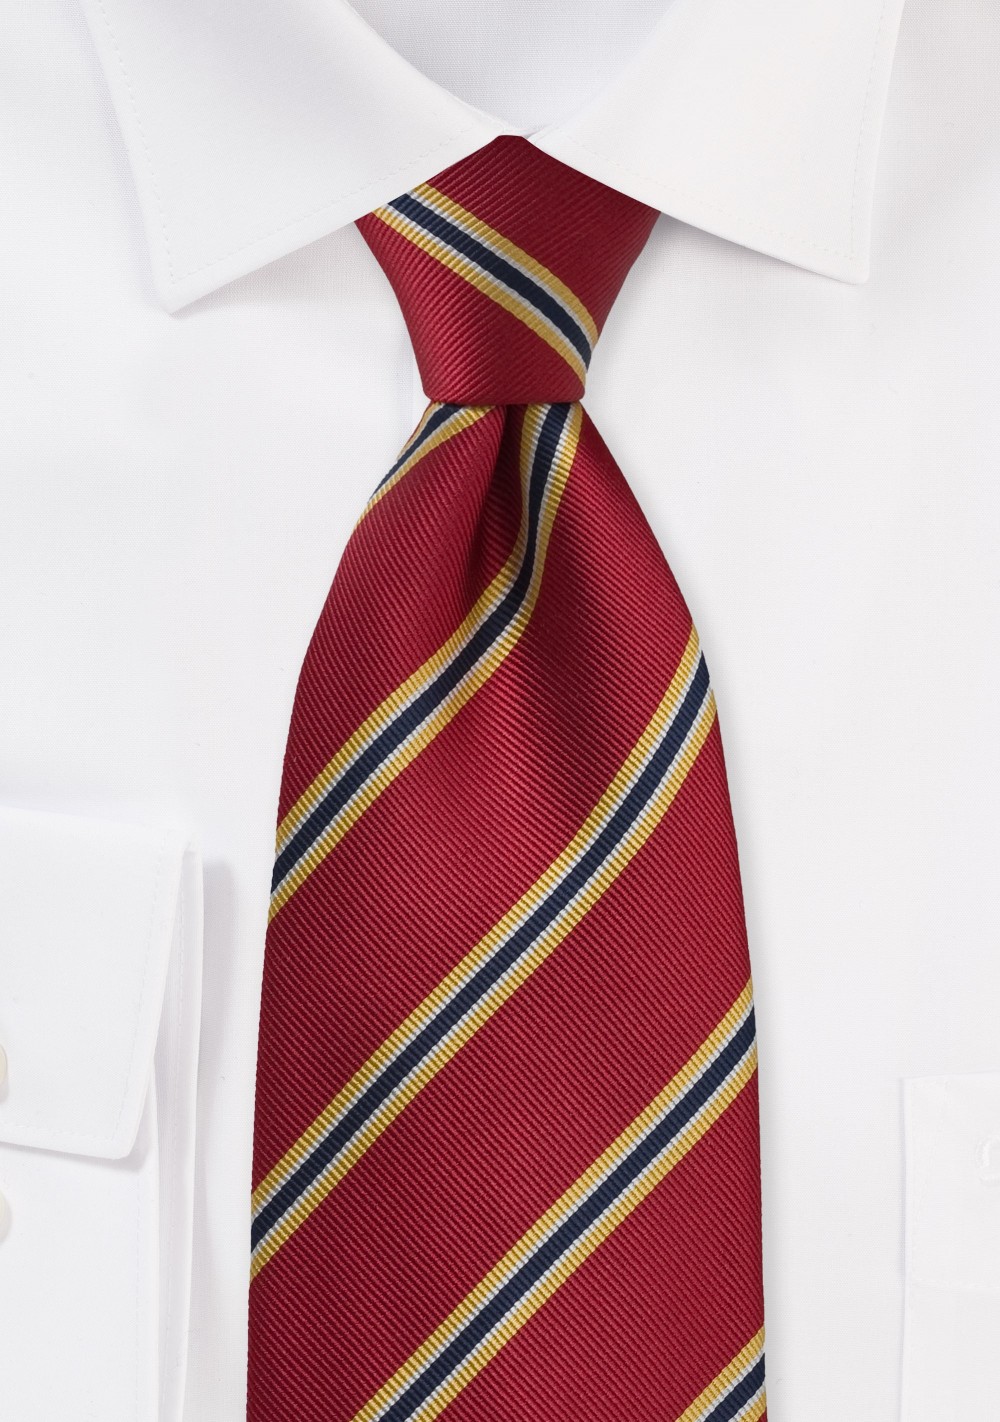 British Regimental Tie for Kids in Crimson-Red and Yellow